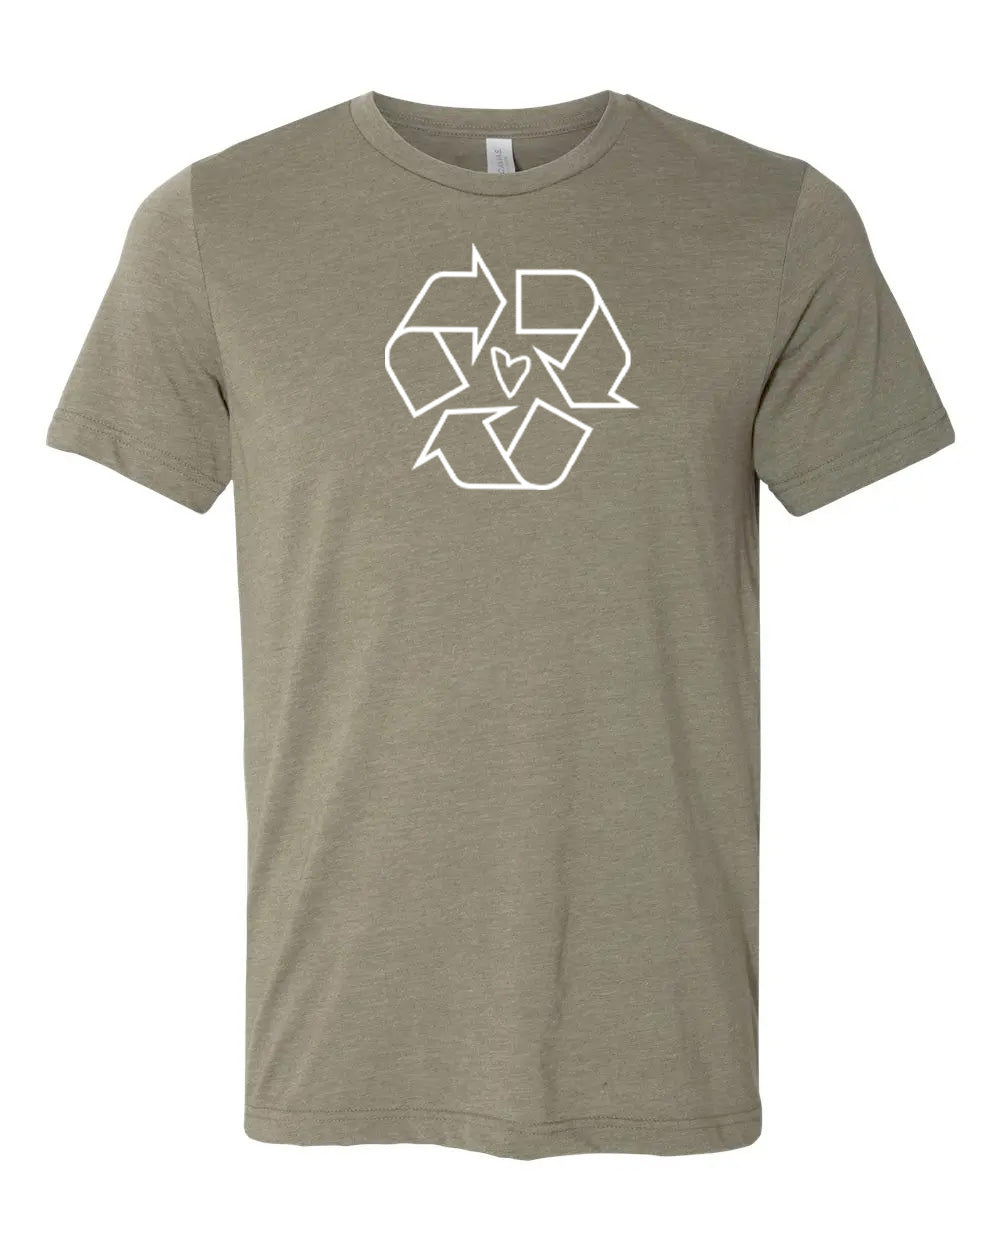 REUSE REDUCE T-Shirts | Unsettled Apparel